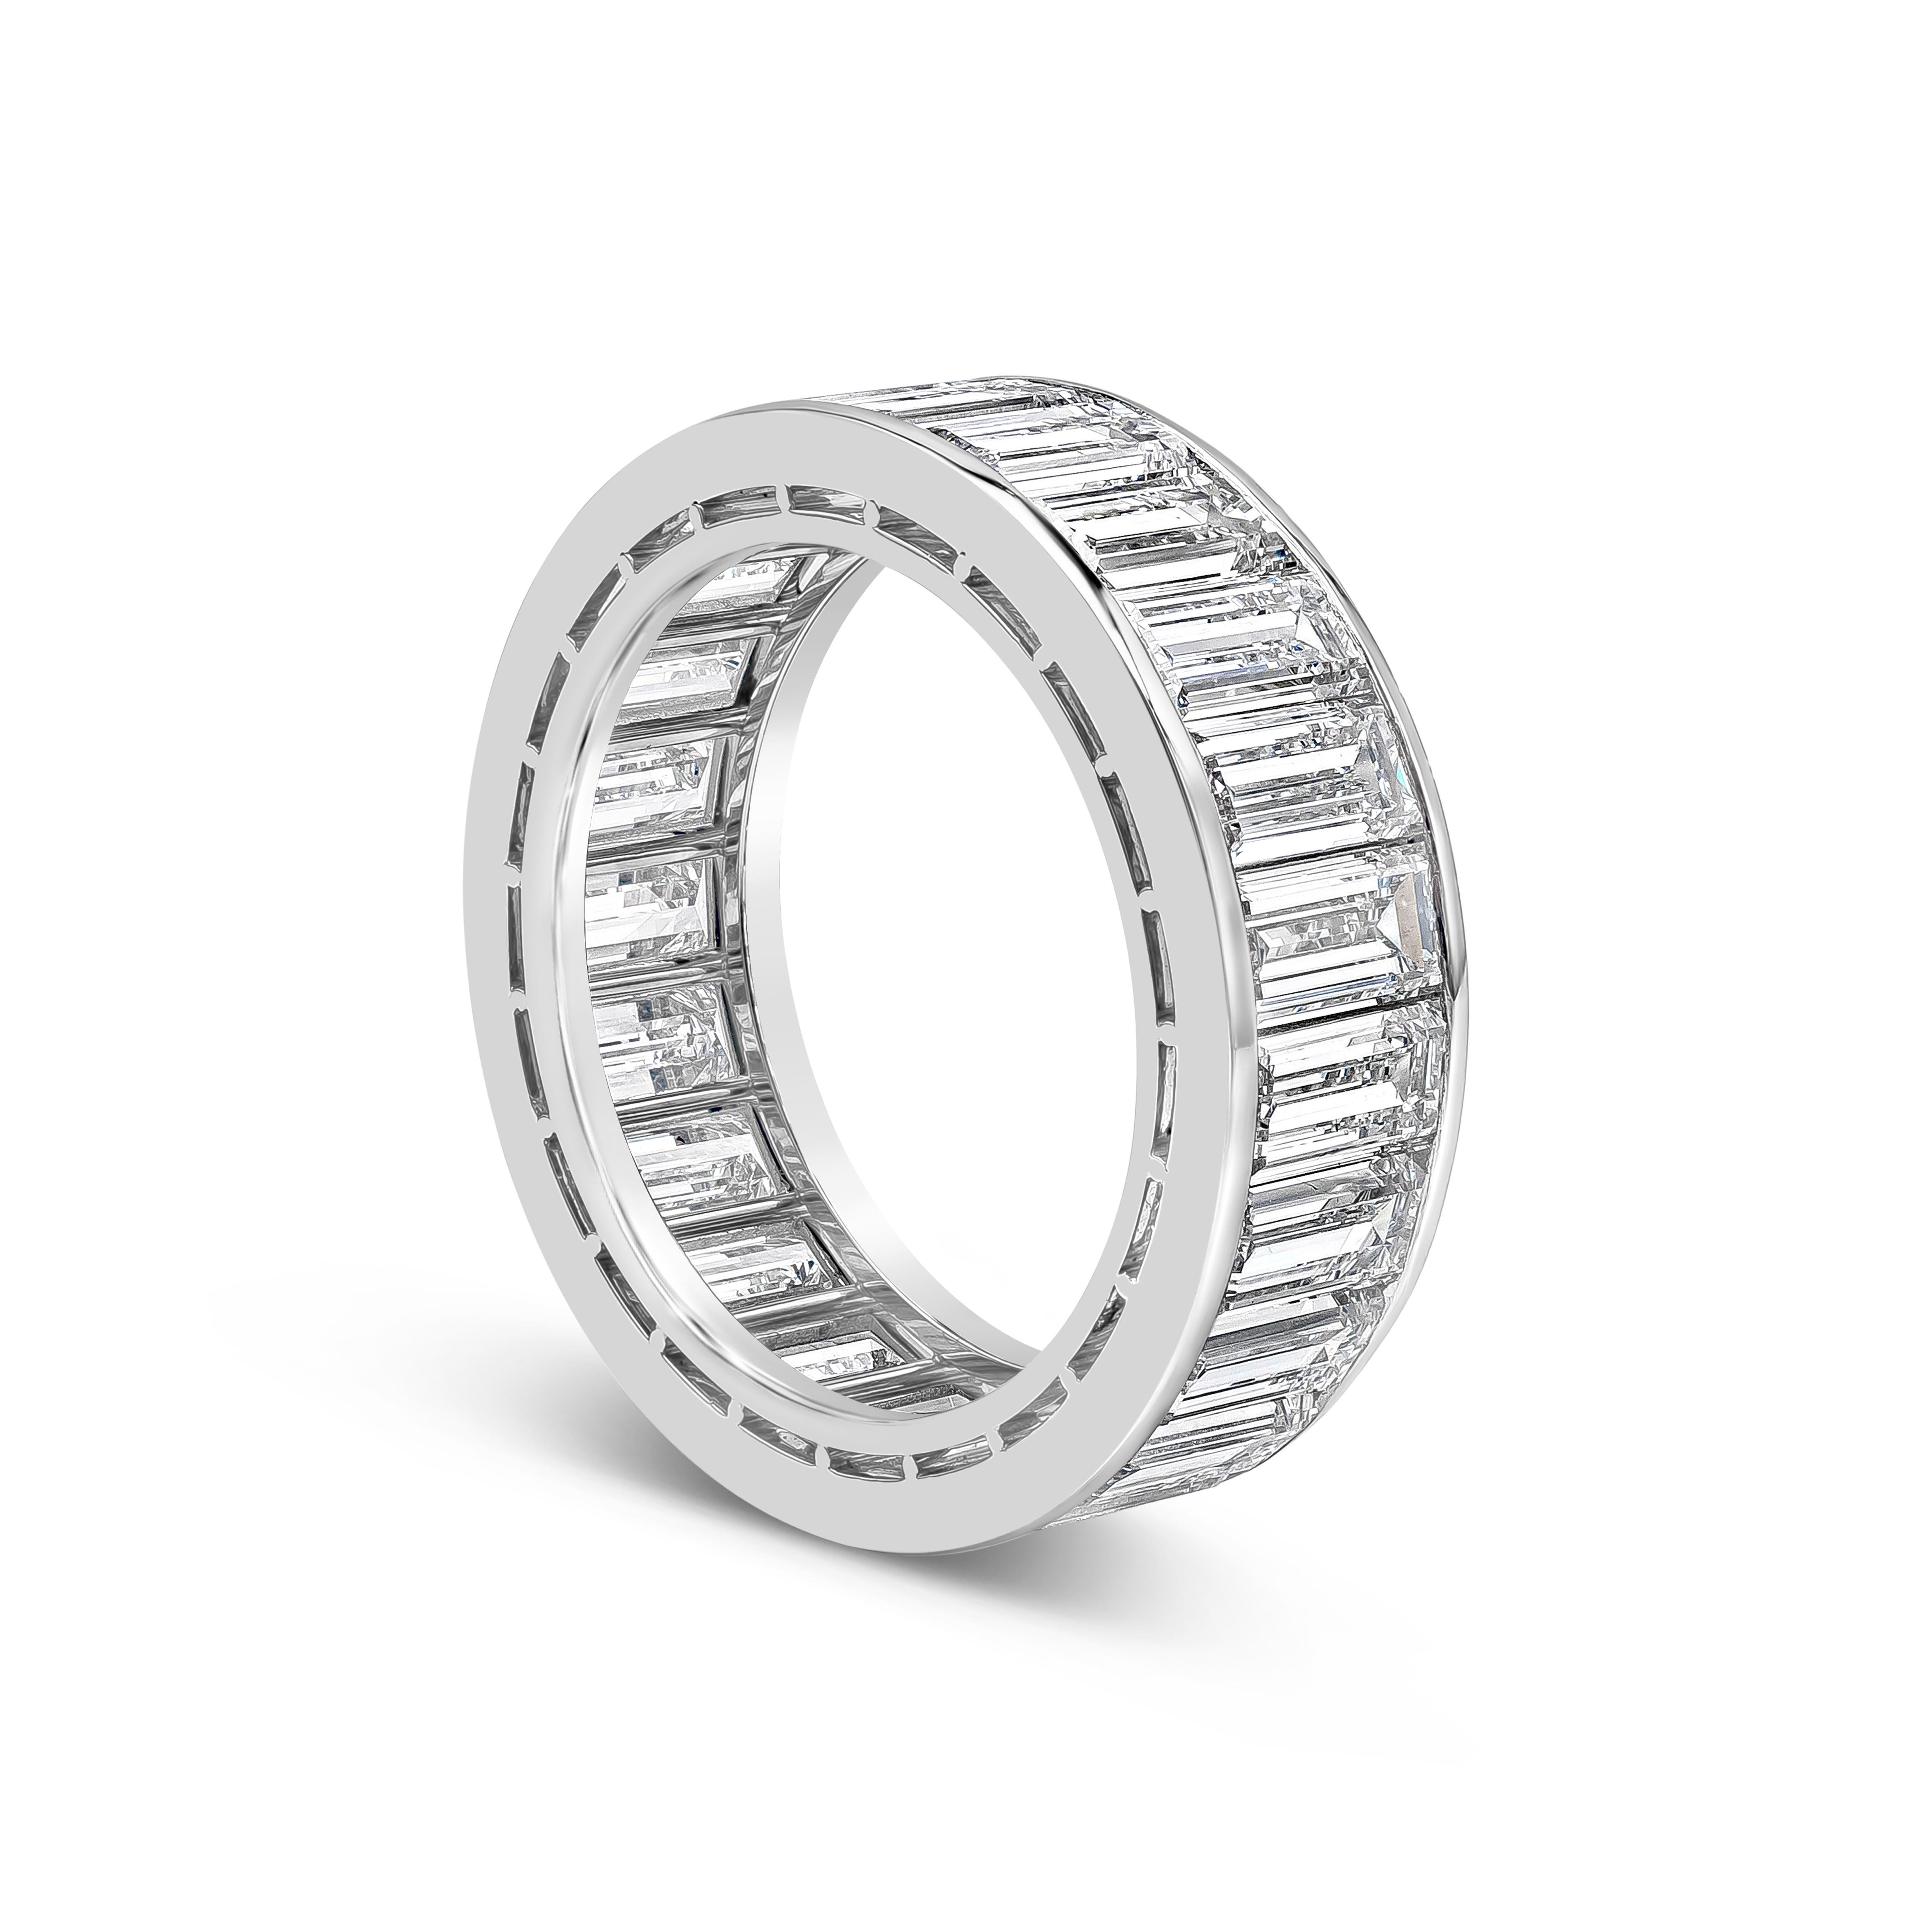 A beautiful and sleek eternity wedding band ring showcasing a row of  perfectly matched colorless baguette cut diamonds weighing 6.97 carats total, D-E-F Color and VS in Clarity. Finely made in Platinum, Size 6.5 US resizable upon request and 6.45mm